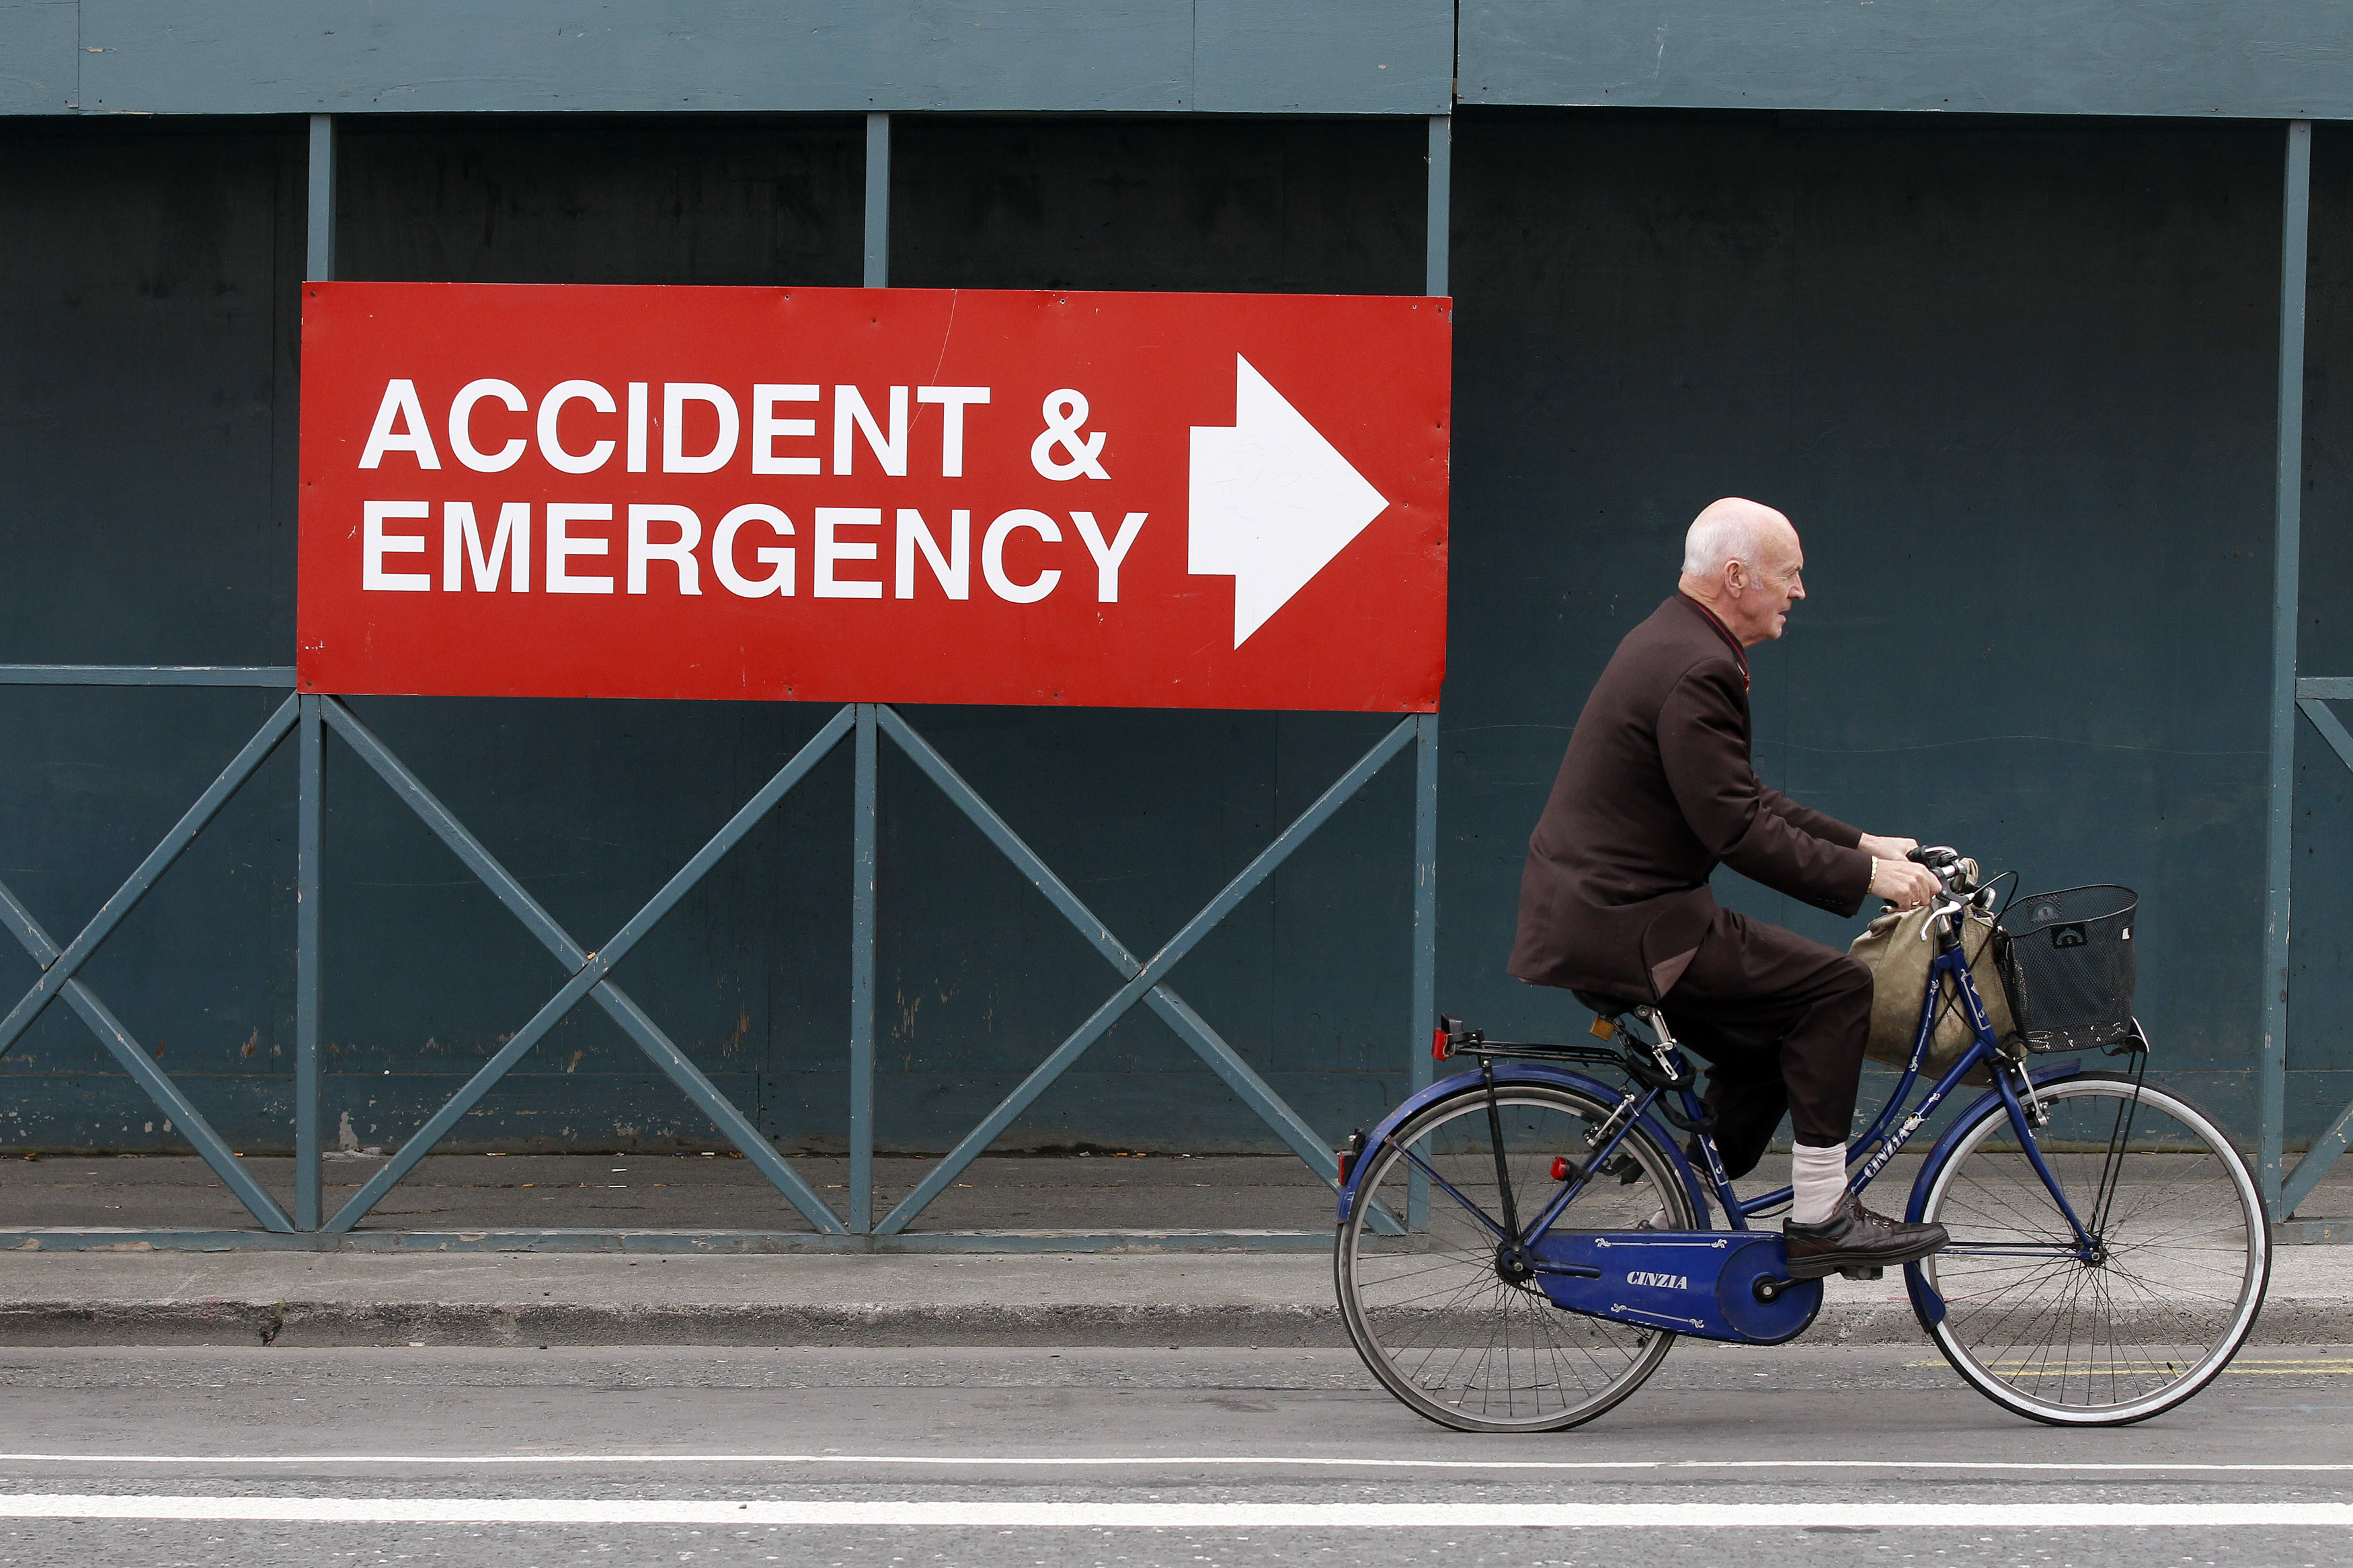 A man rides a bicycle near the entrance to the Mater Hospital in Dublin